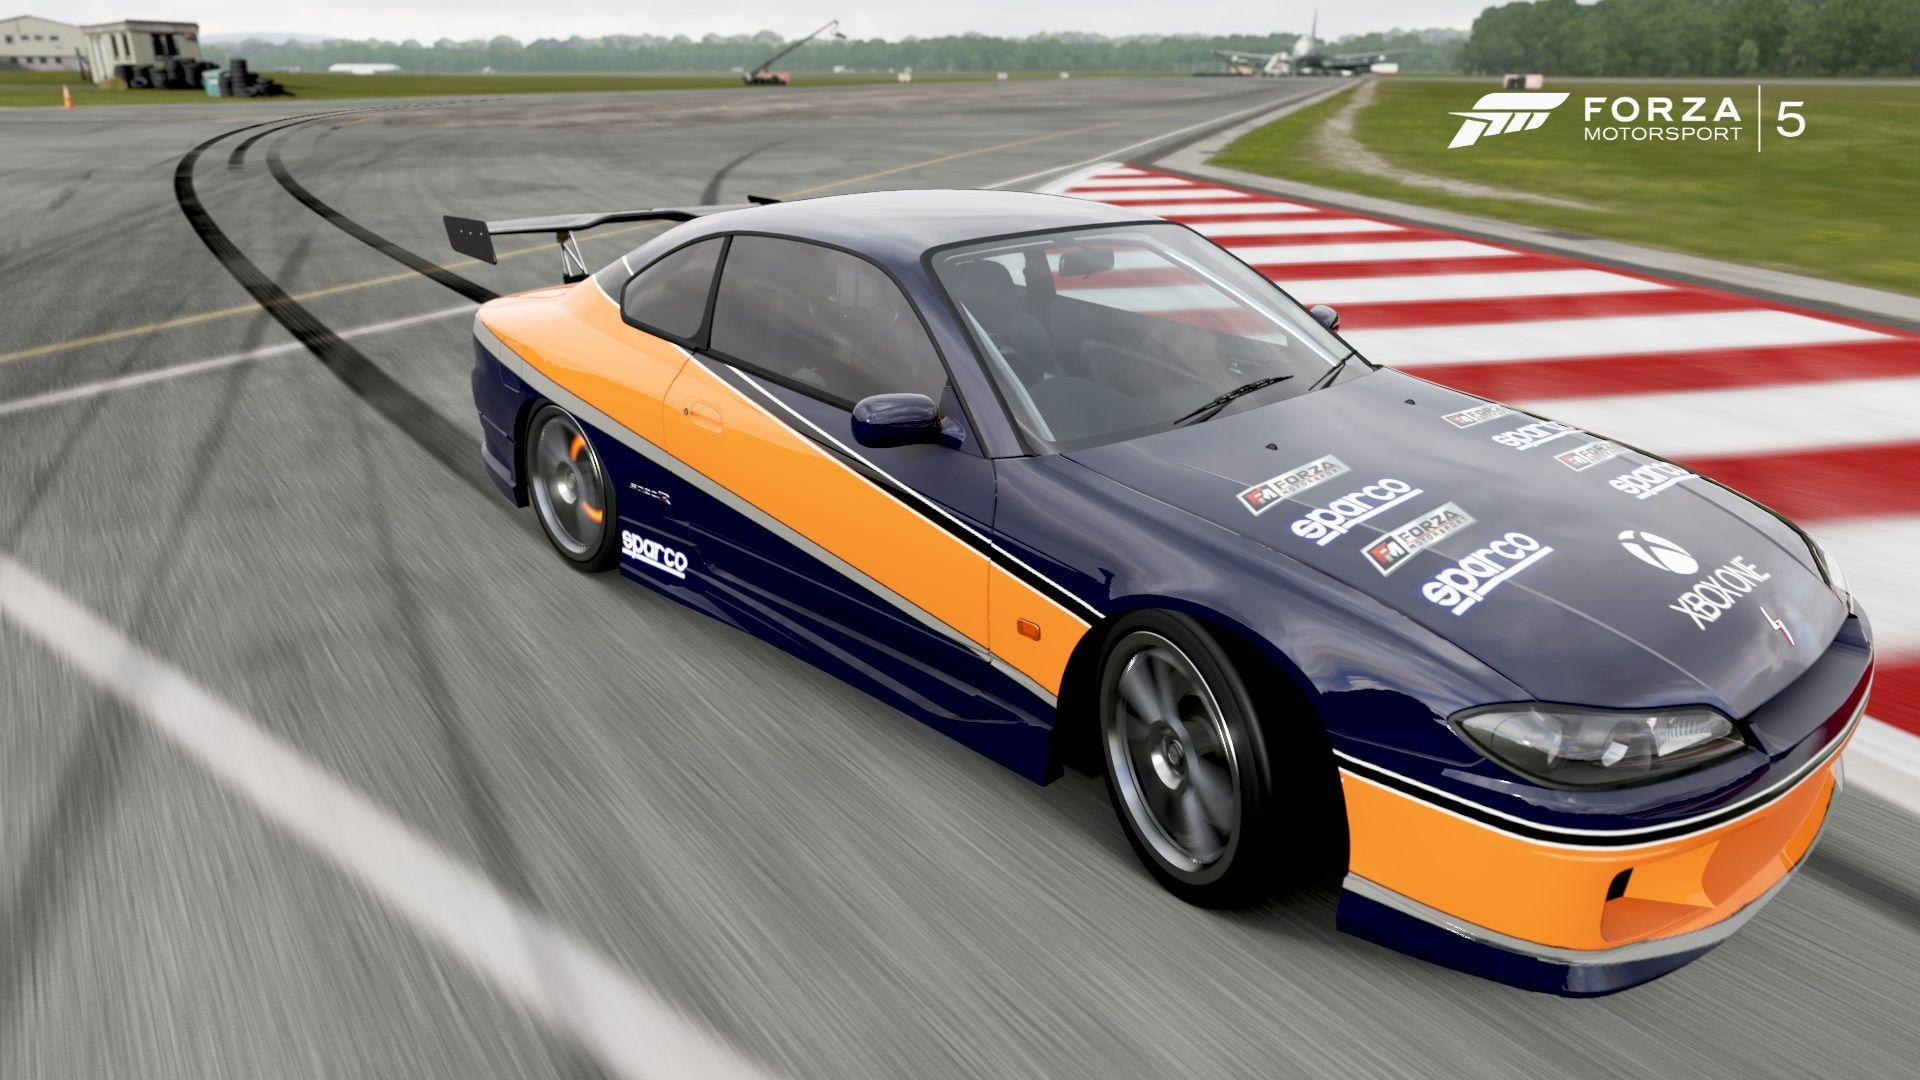 Han's Nissan Silvia from The Fast and the Furious: Tokyo Drift